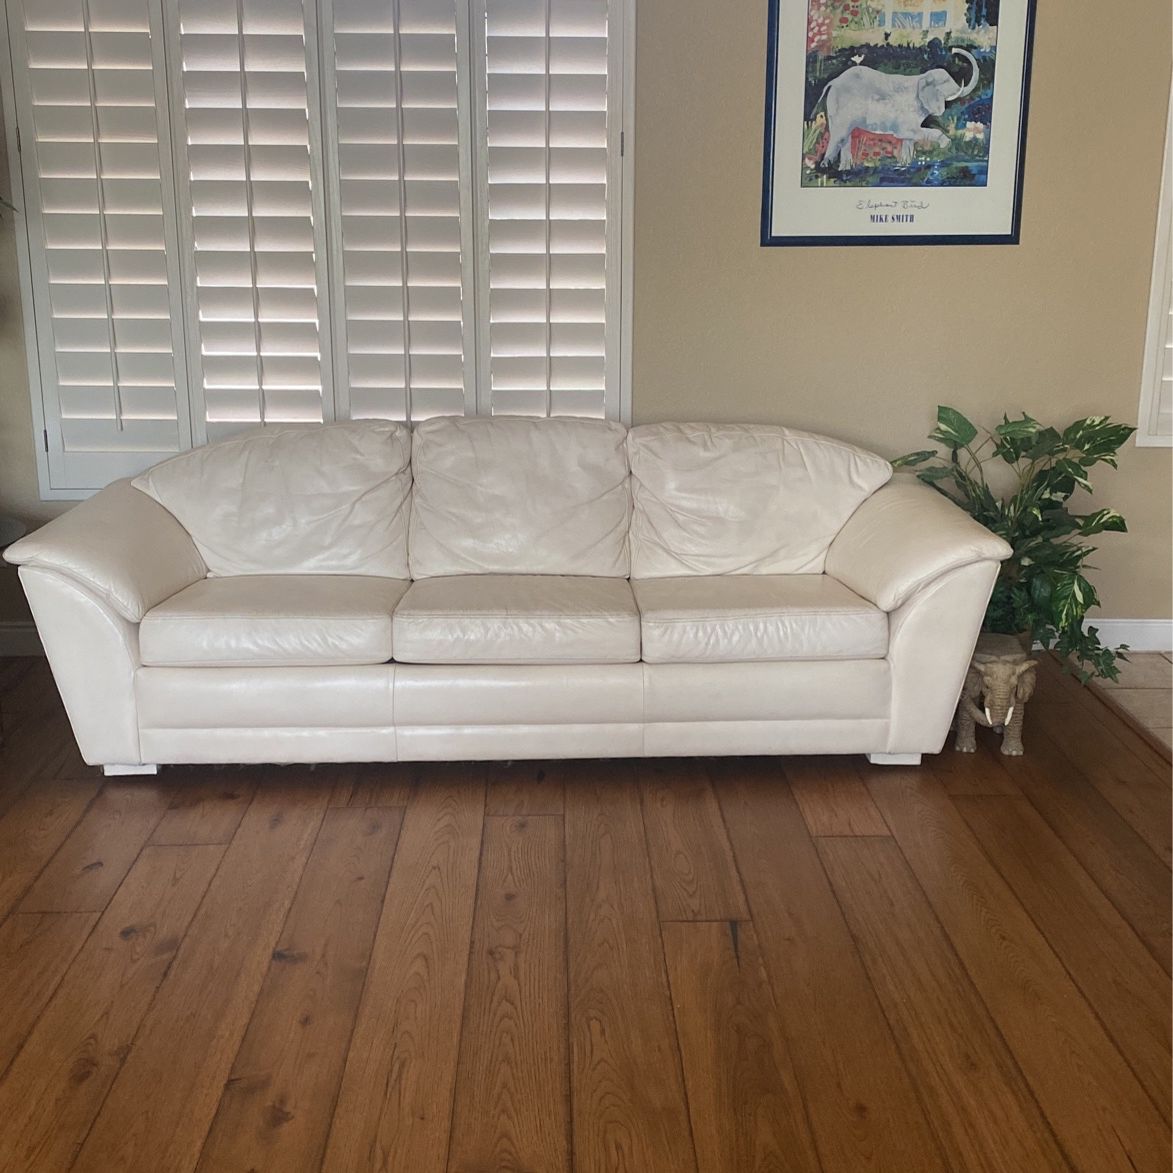 Creme Colored Leather Couch